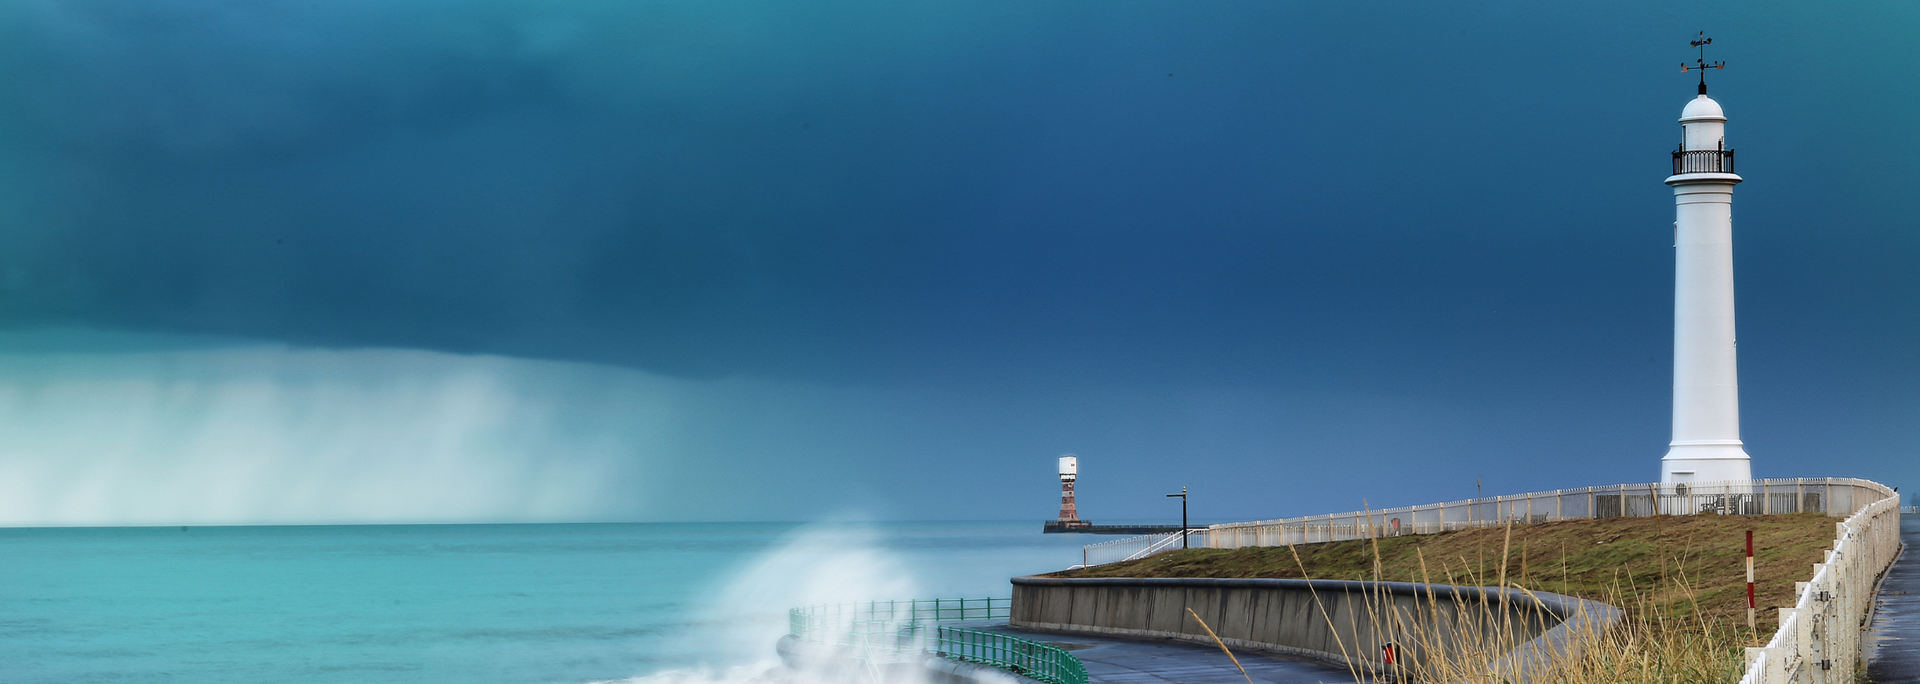 Picture of Roker and Seaburn beaches